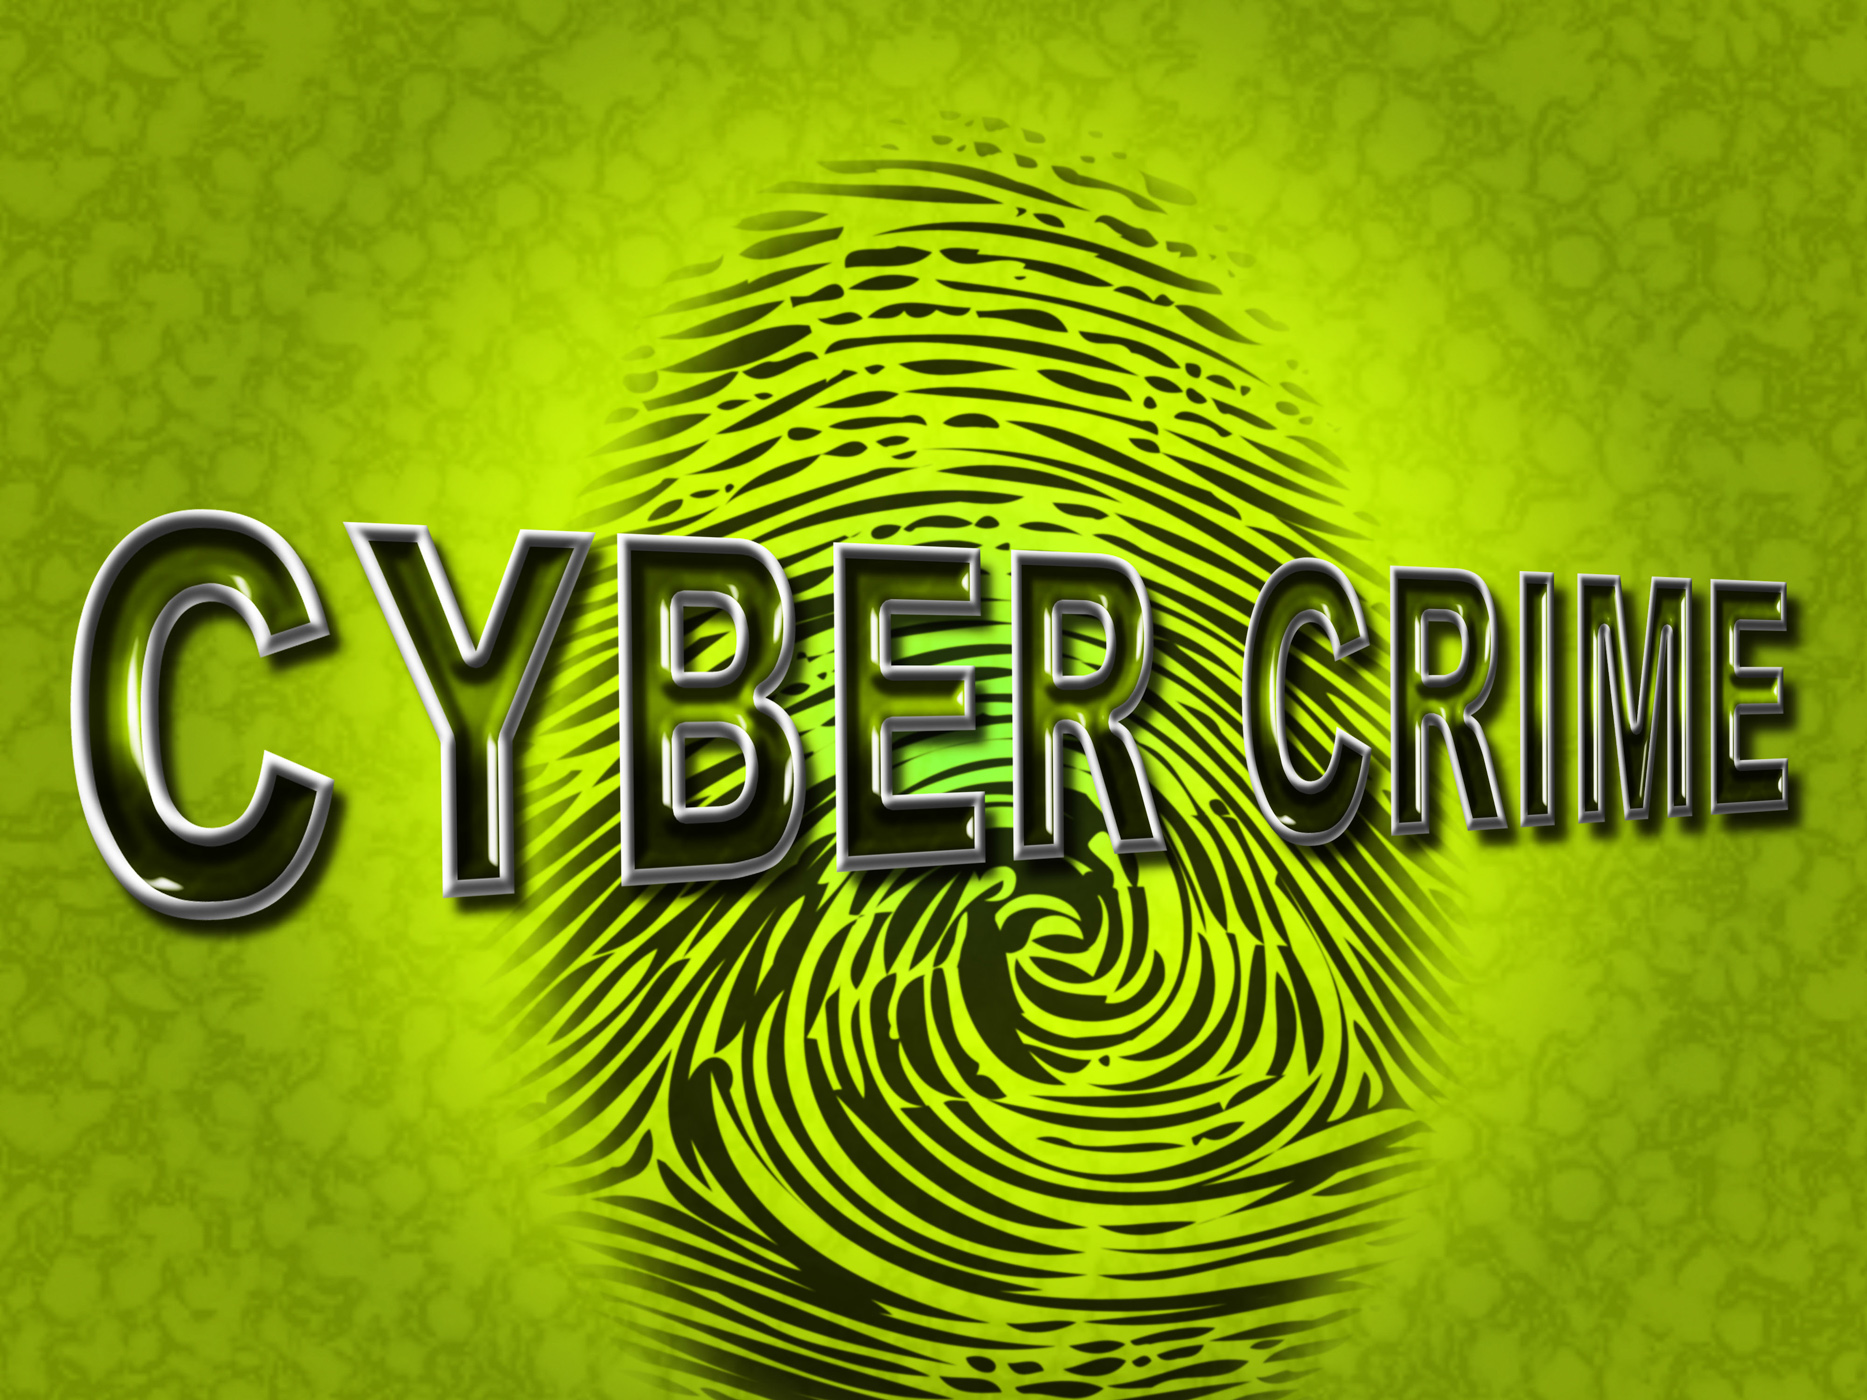 Cyber crime indicates spyware malware and hackers photo